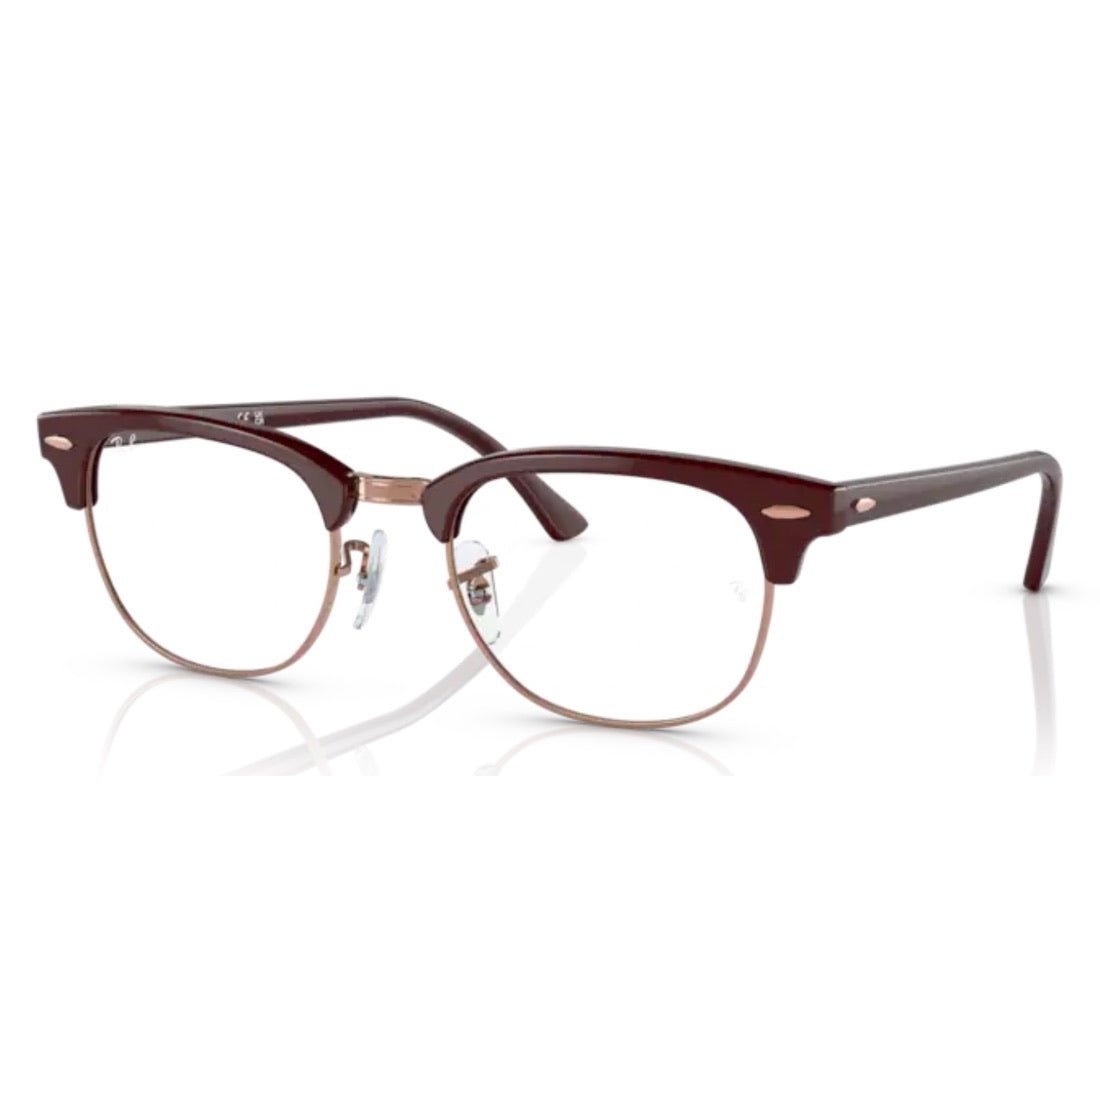 RAY-BAN - RX5154 8230 - Clubmaster - PARIS LUNETIER